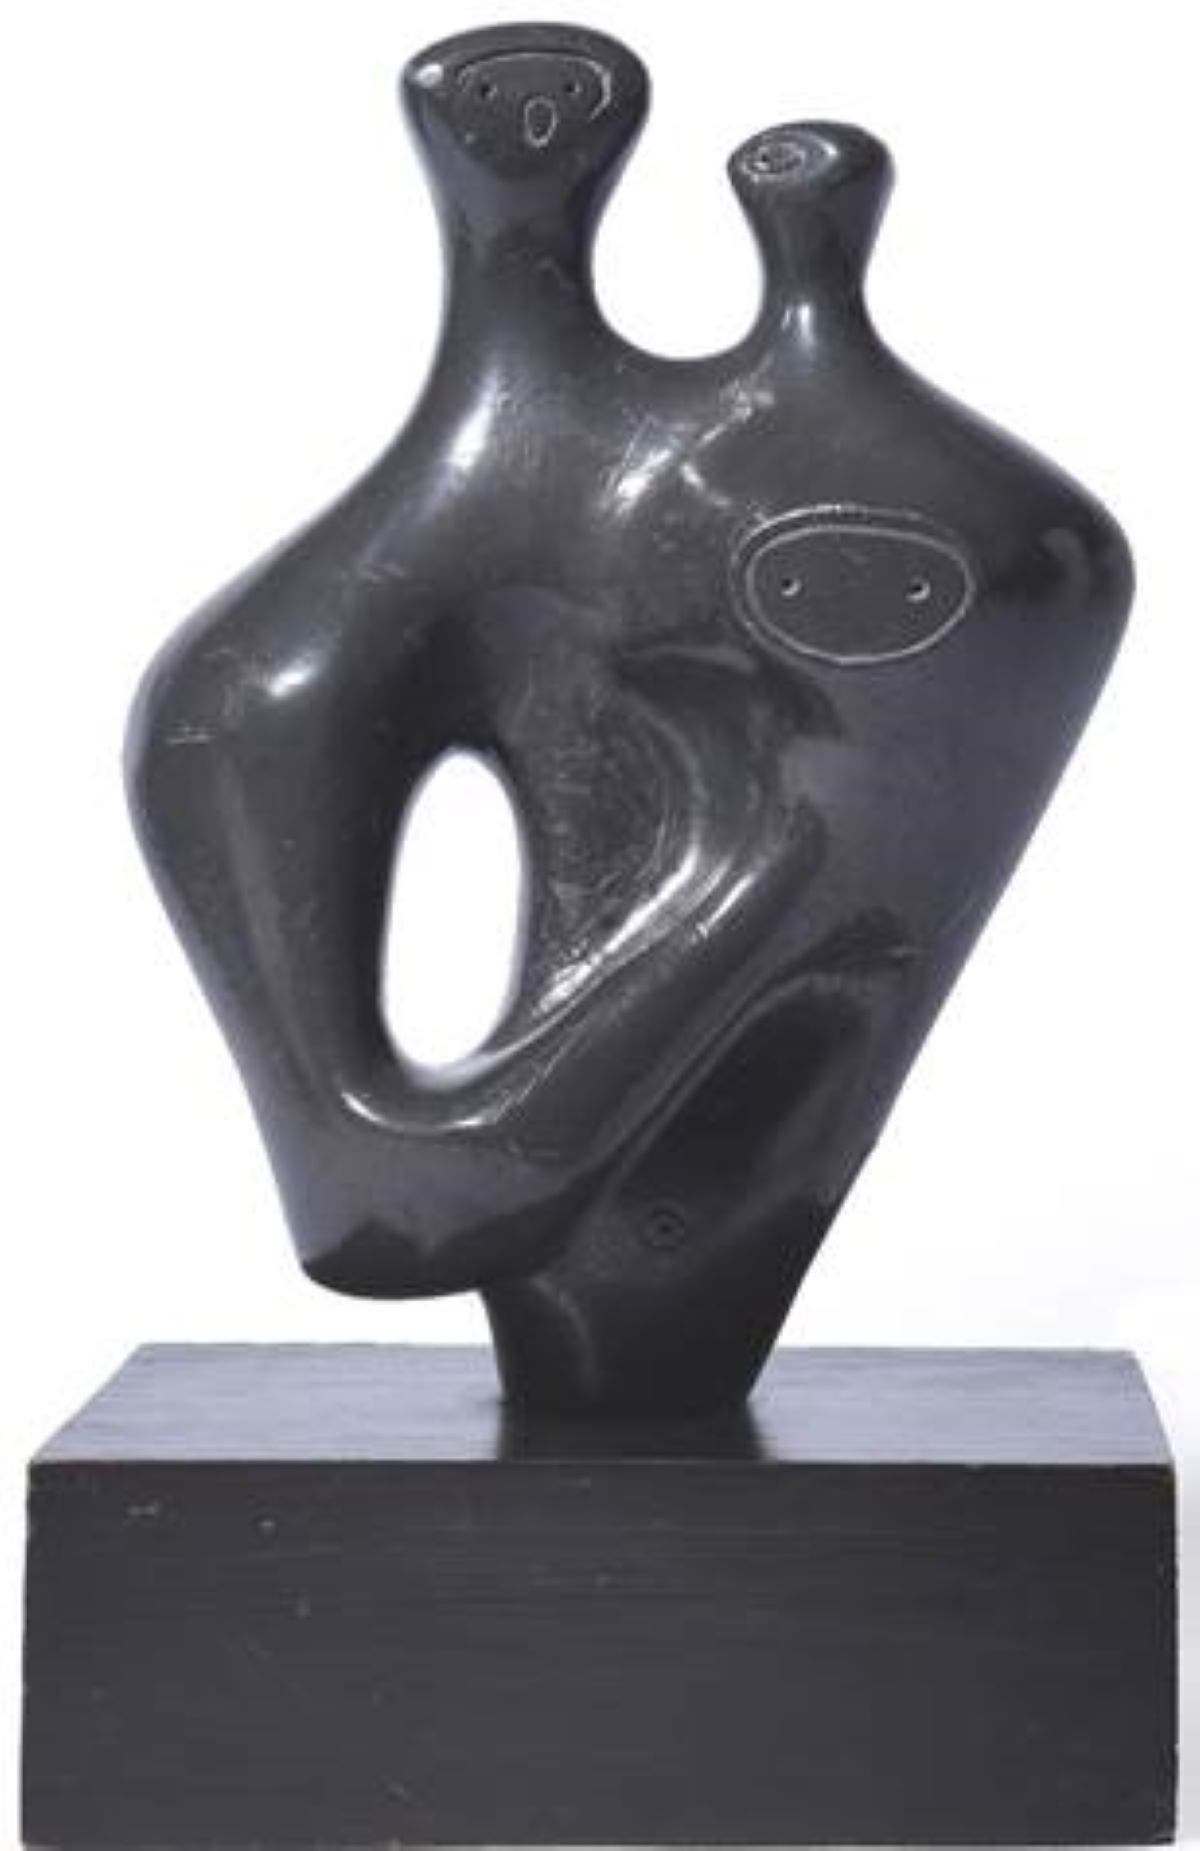 ‘Unique and rare’ Henry Moore sculpture discovered on family’s mantelpiece